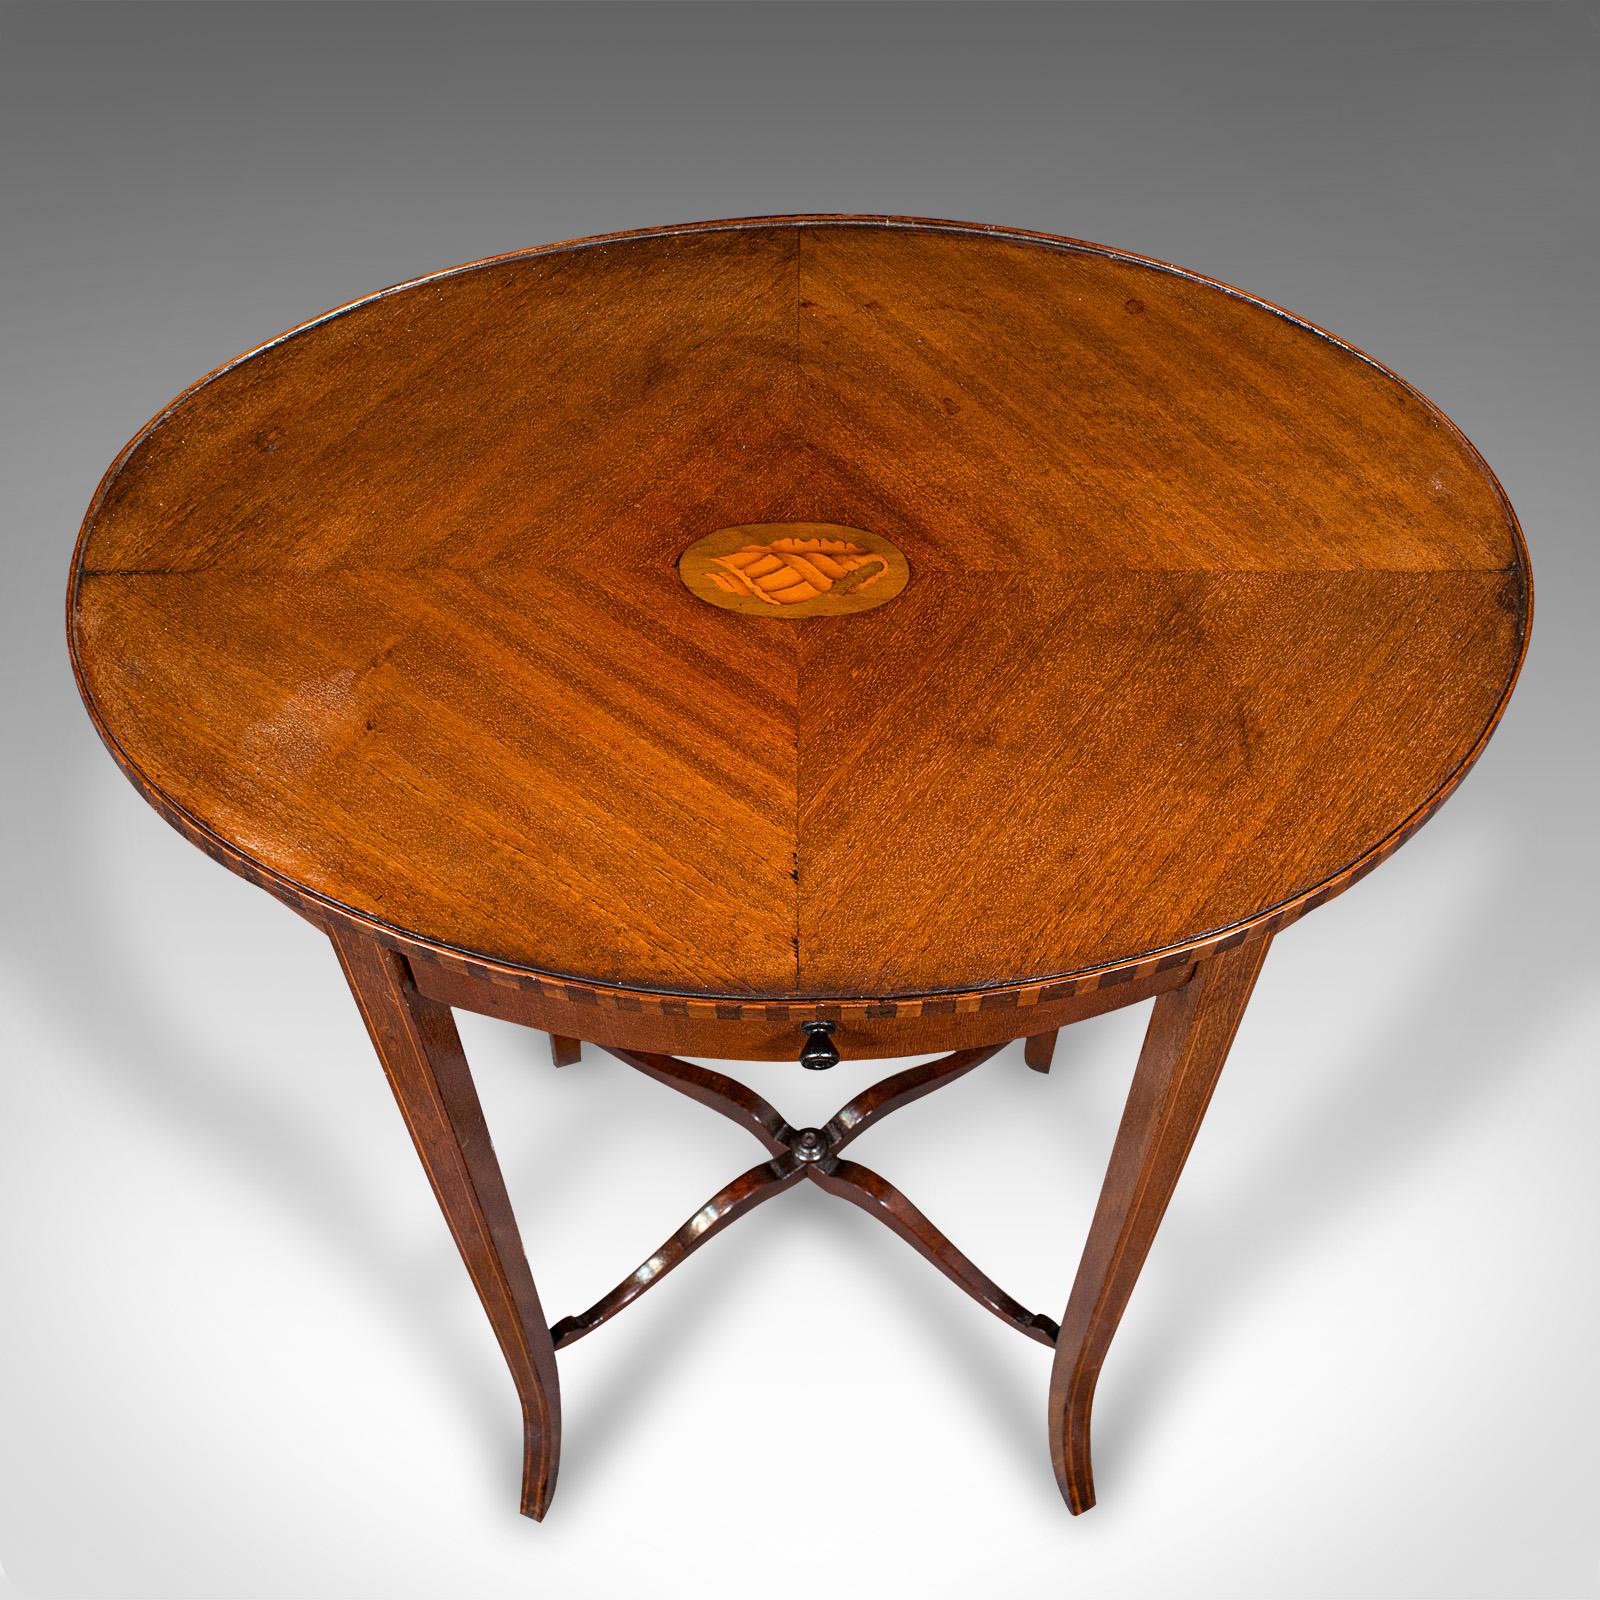 20th Century Small Antique Lamp Table, English, Oval, Side, Regency Revival, Edwardian, 1910